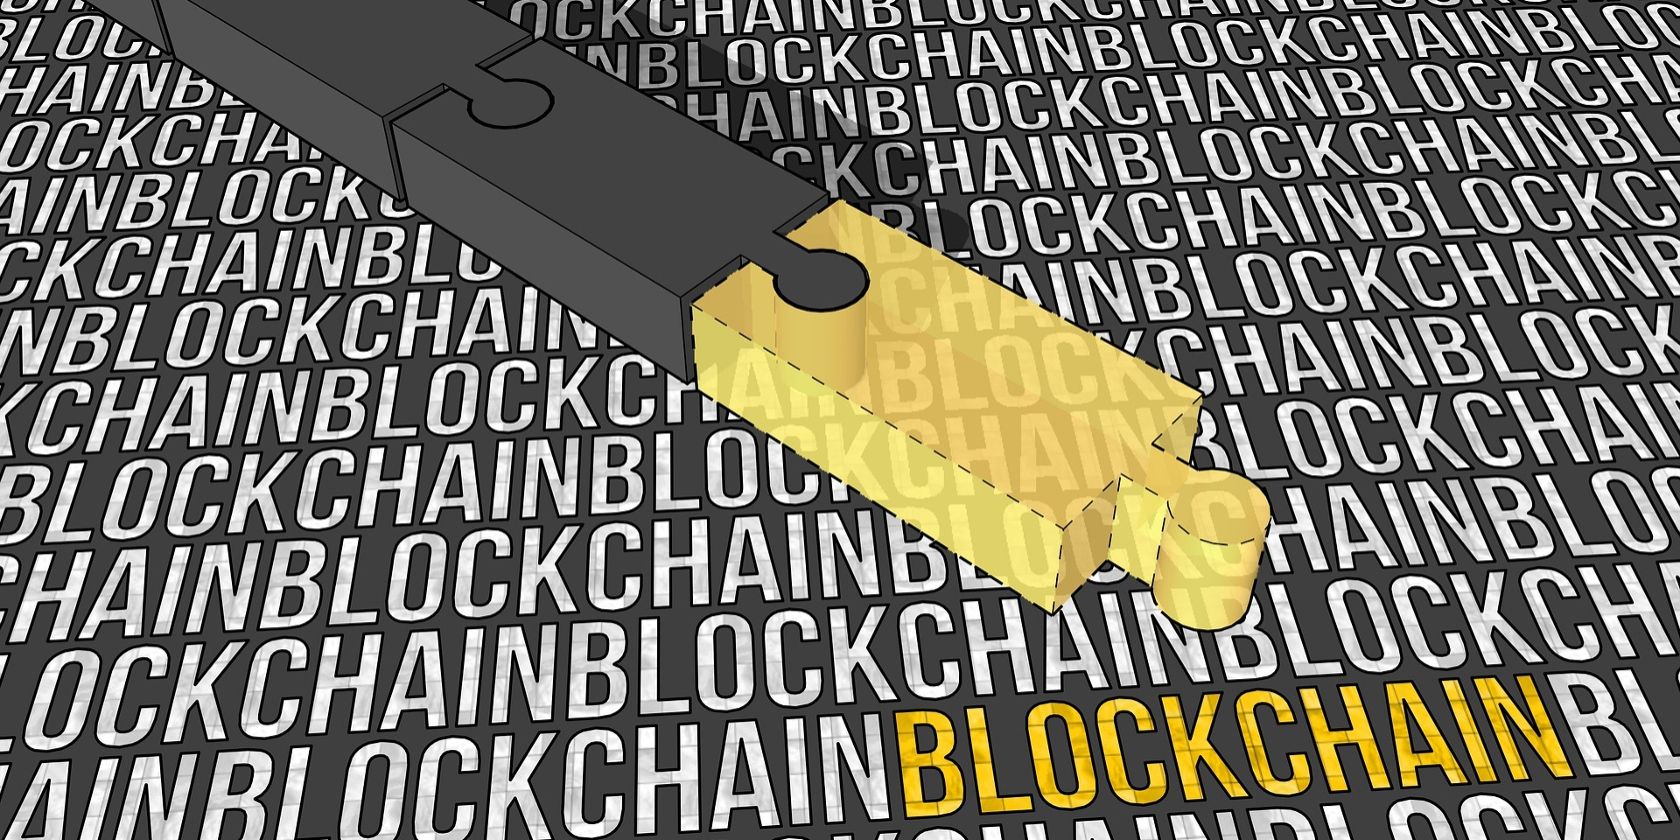 What Is a Cryptocurrency Block and Why Is It Important?